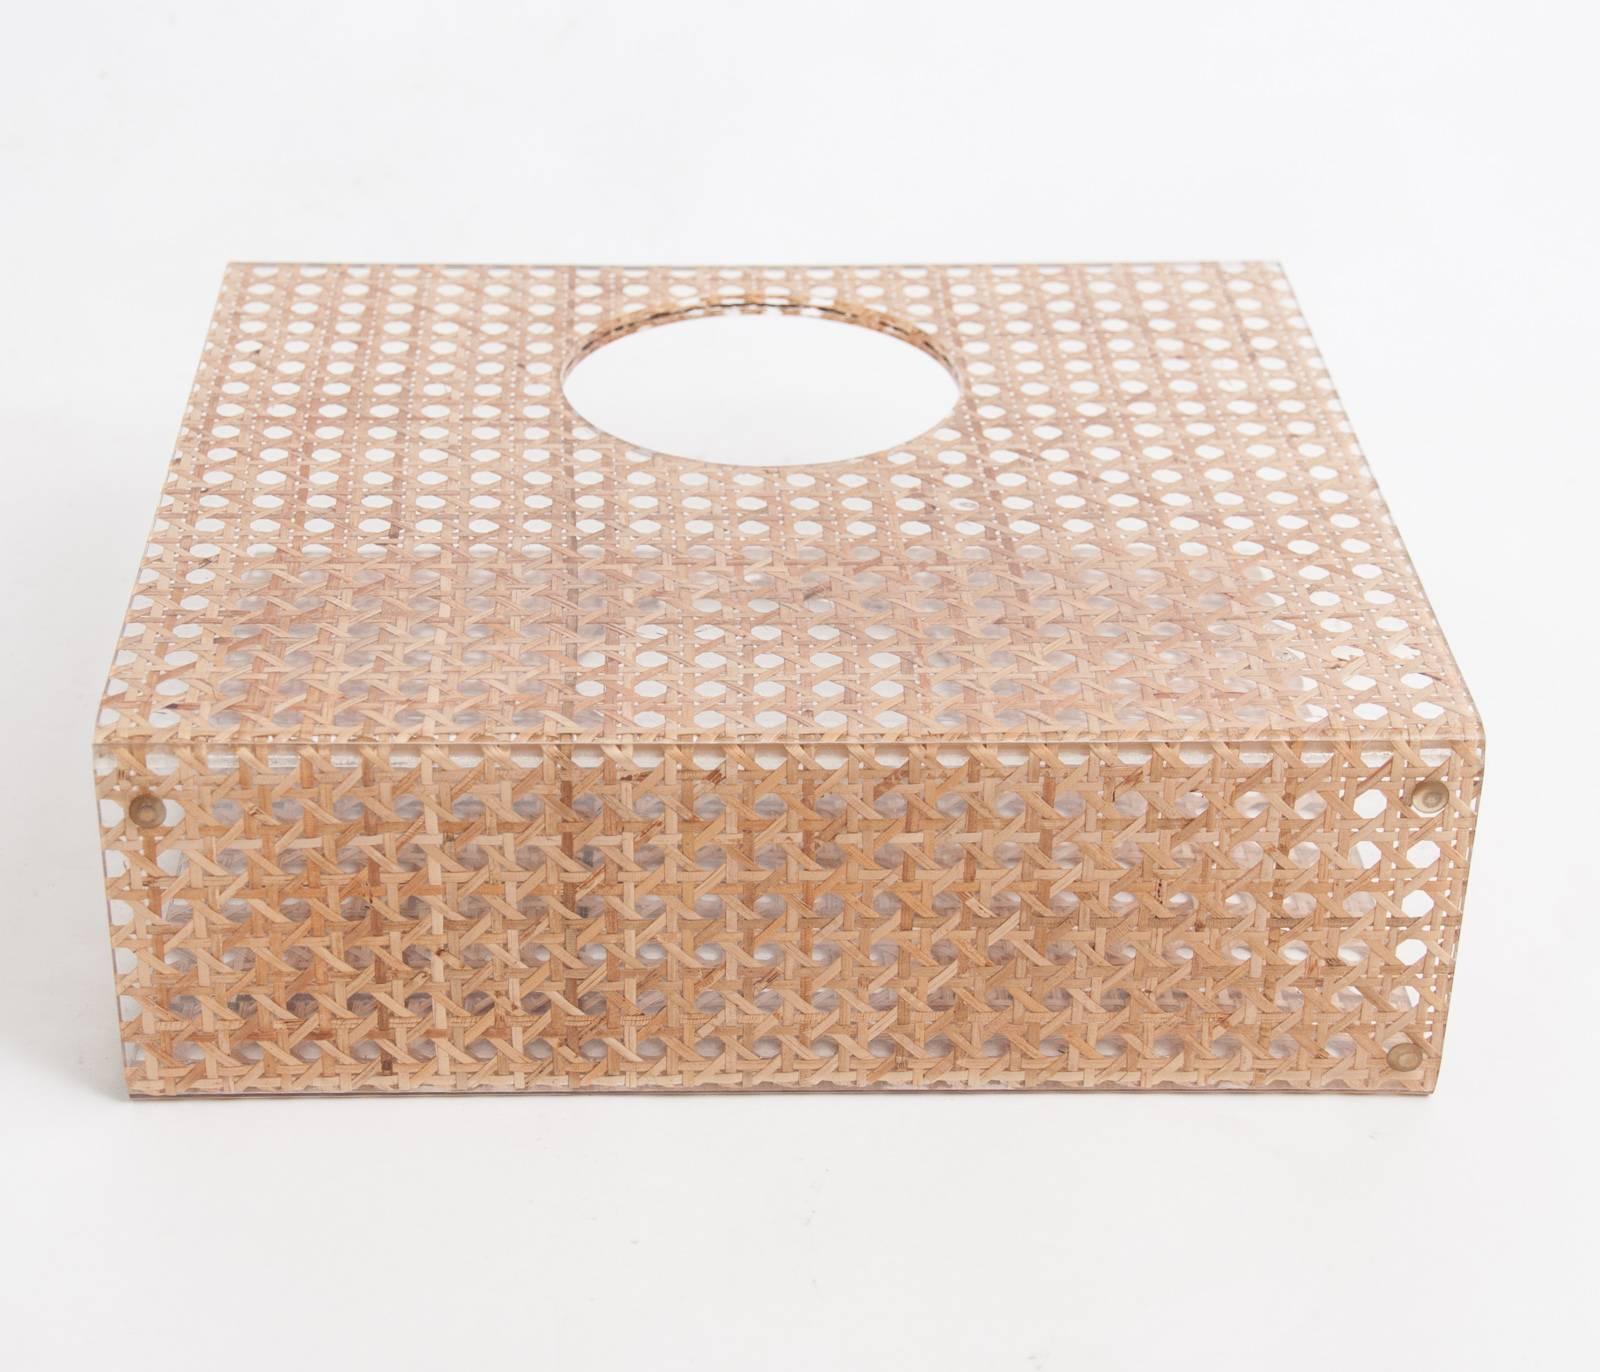 Small and stylish 1970s magazine holder made from Lucite with embedded rattan cane work. Attributed to Christian Dior Home collection possibly designed by Gabriella Crespi.